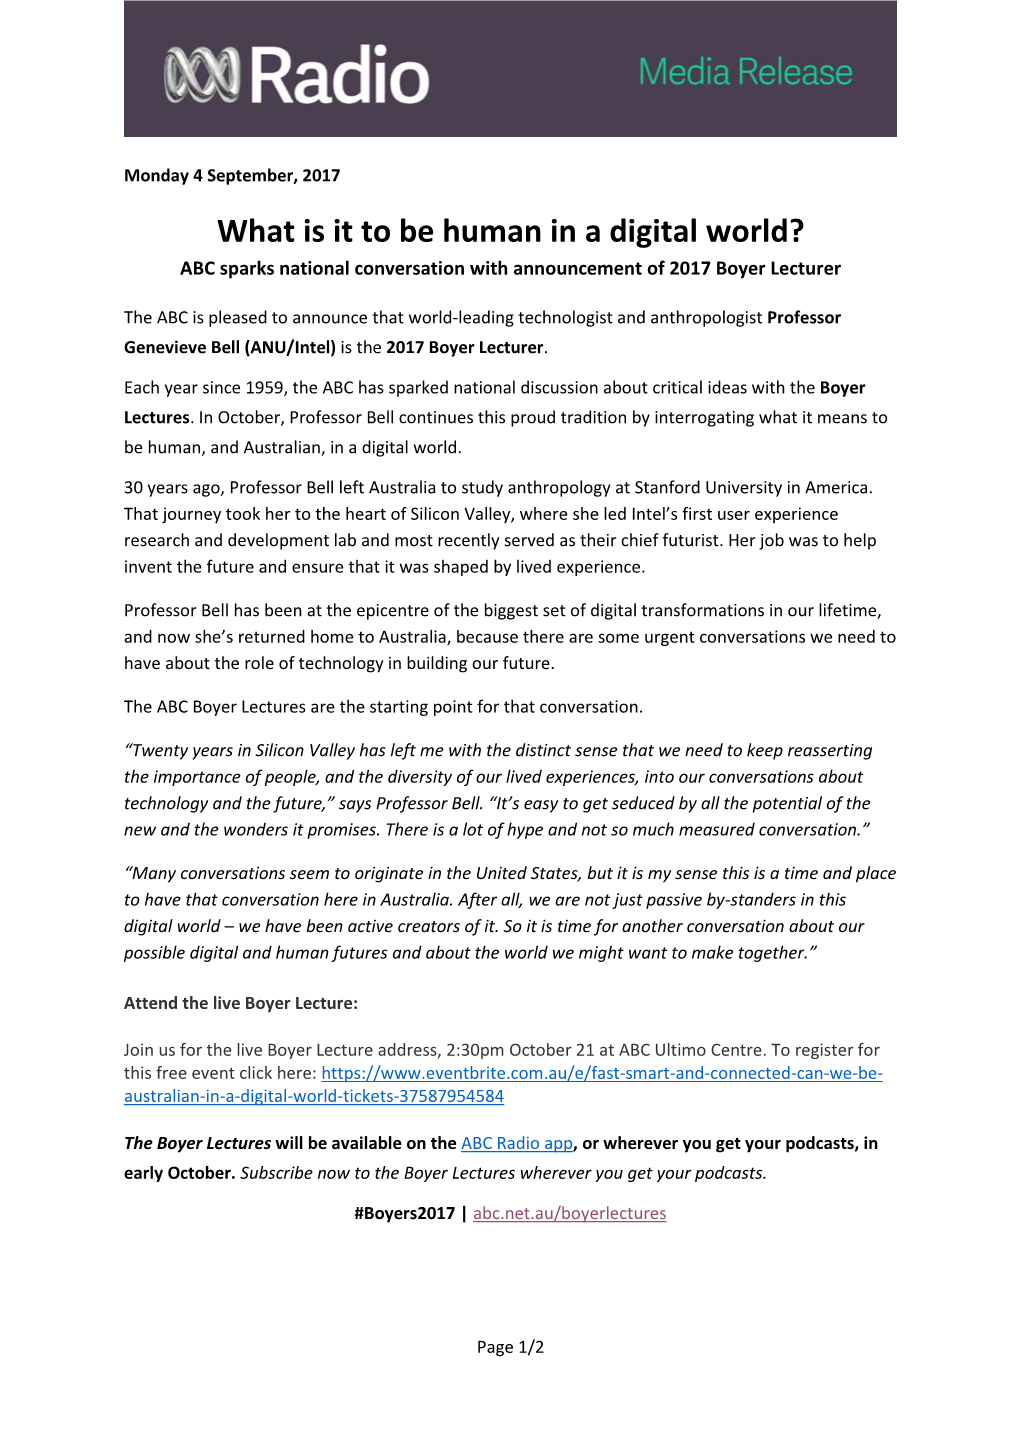 What Is It to Be Human in a Digital World?